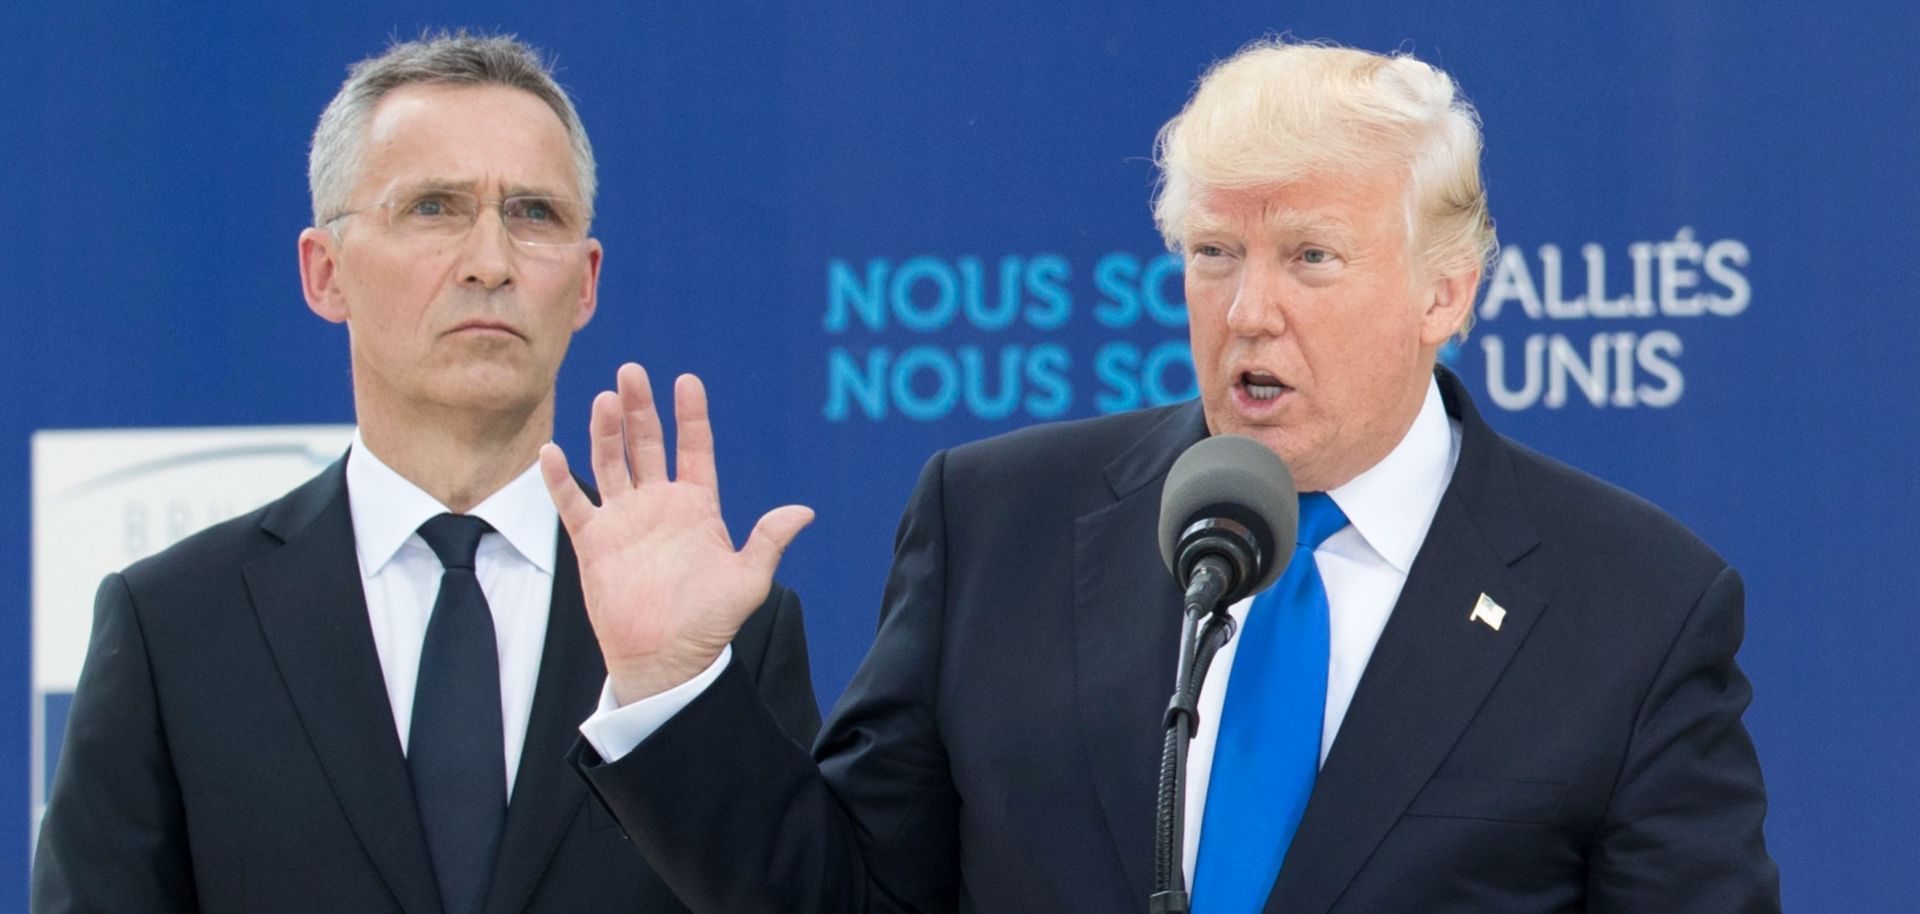 U.S. President Donald Trump and NATO Secretary-General Jens Stoltenberg speak May 25, 2017, at NATO headquarters in Brussels.